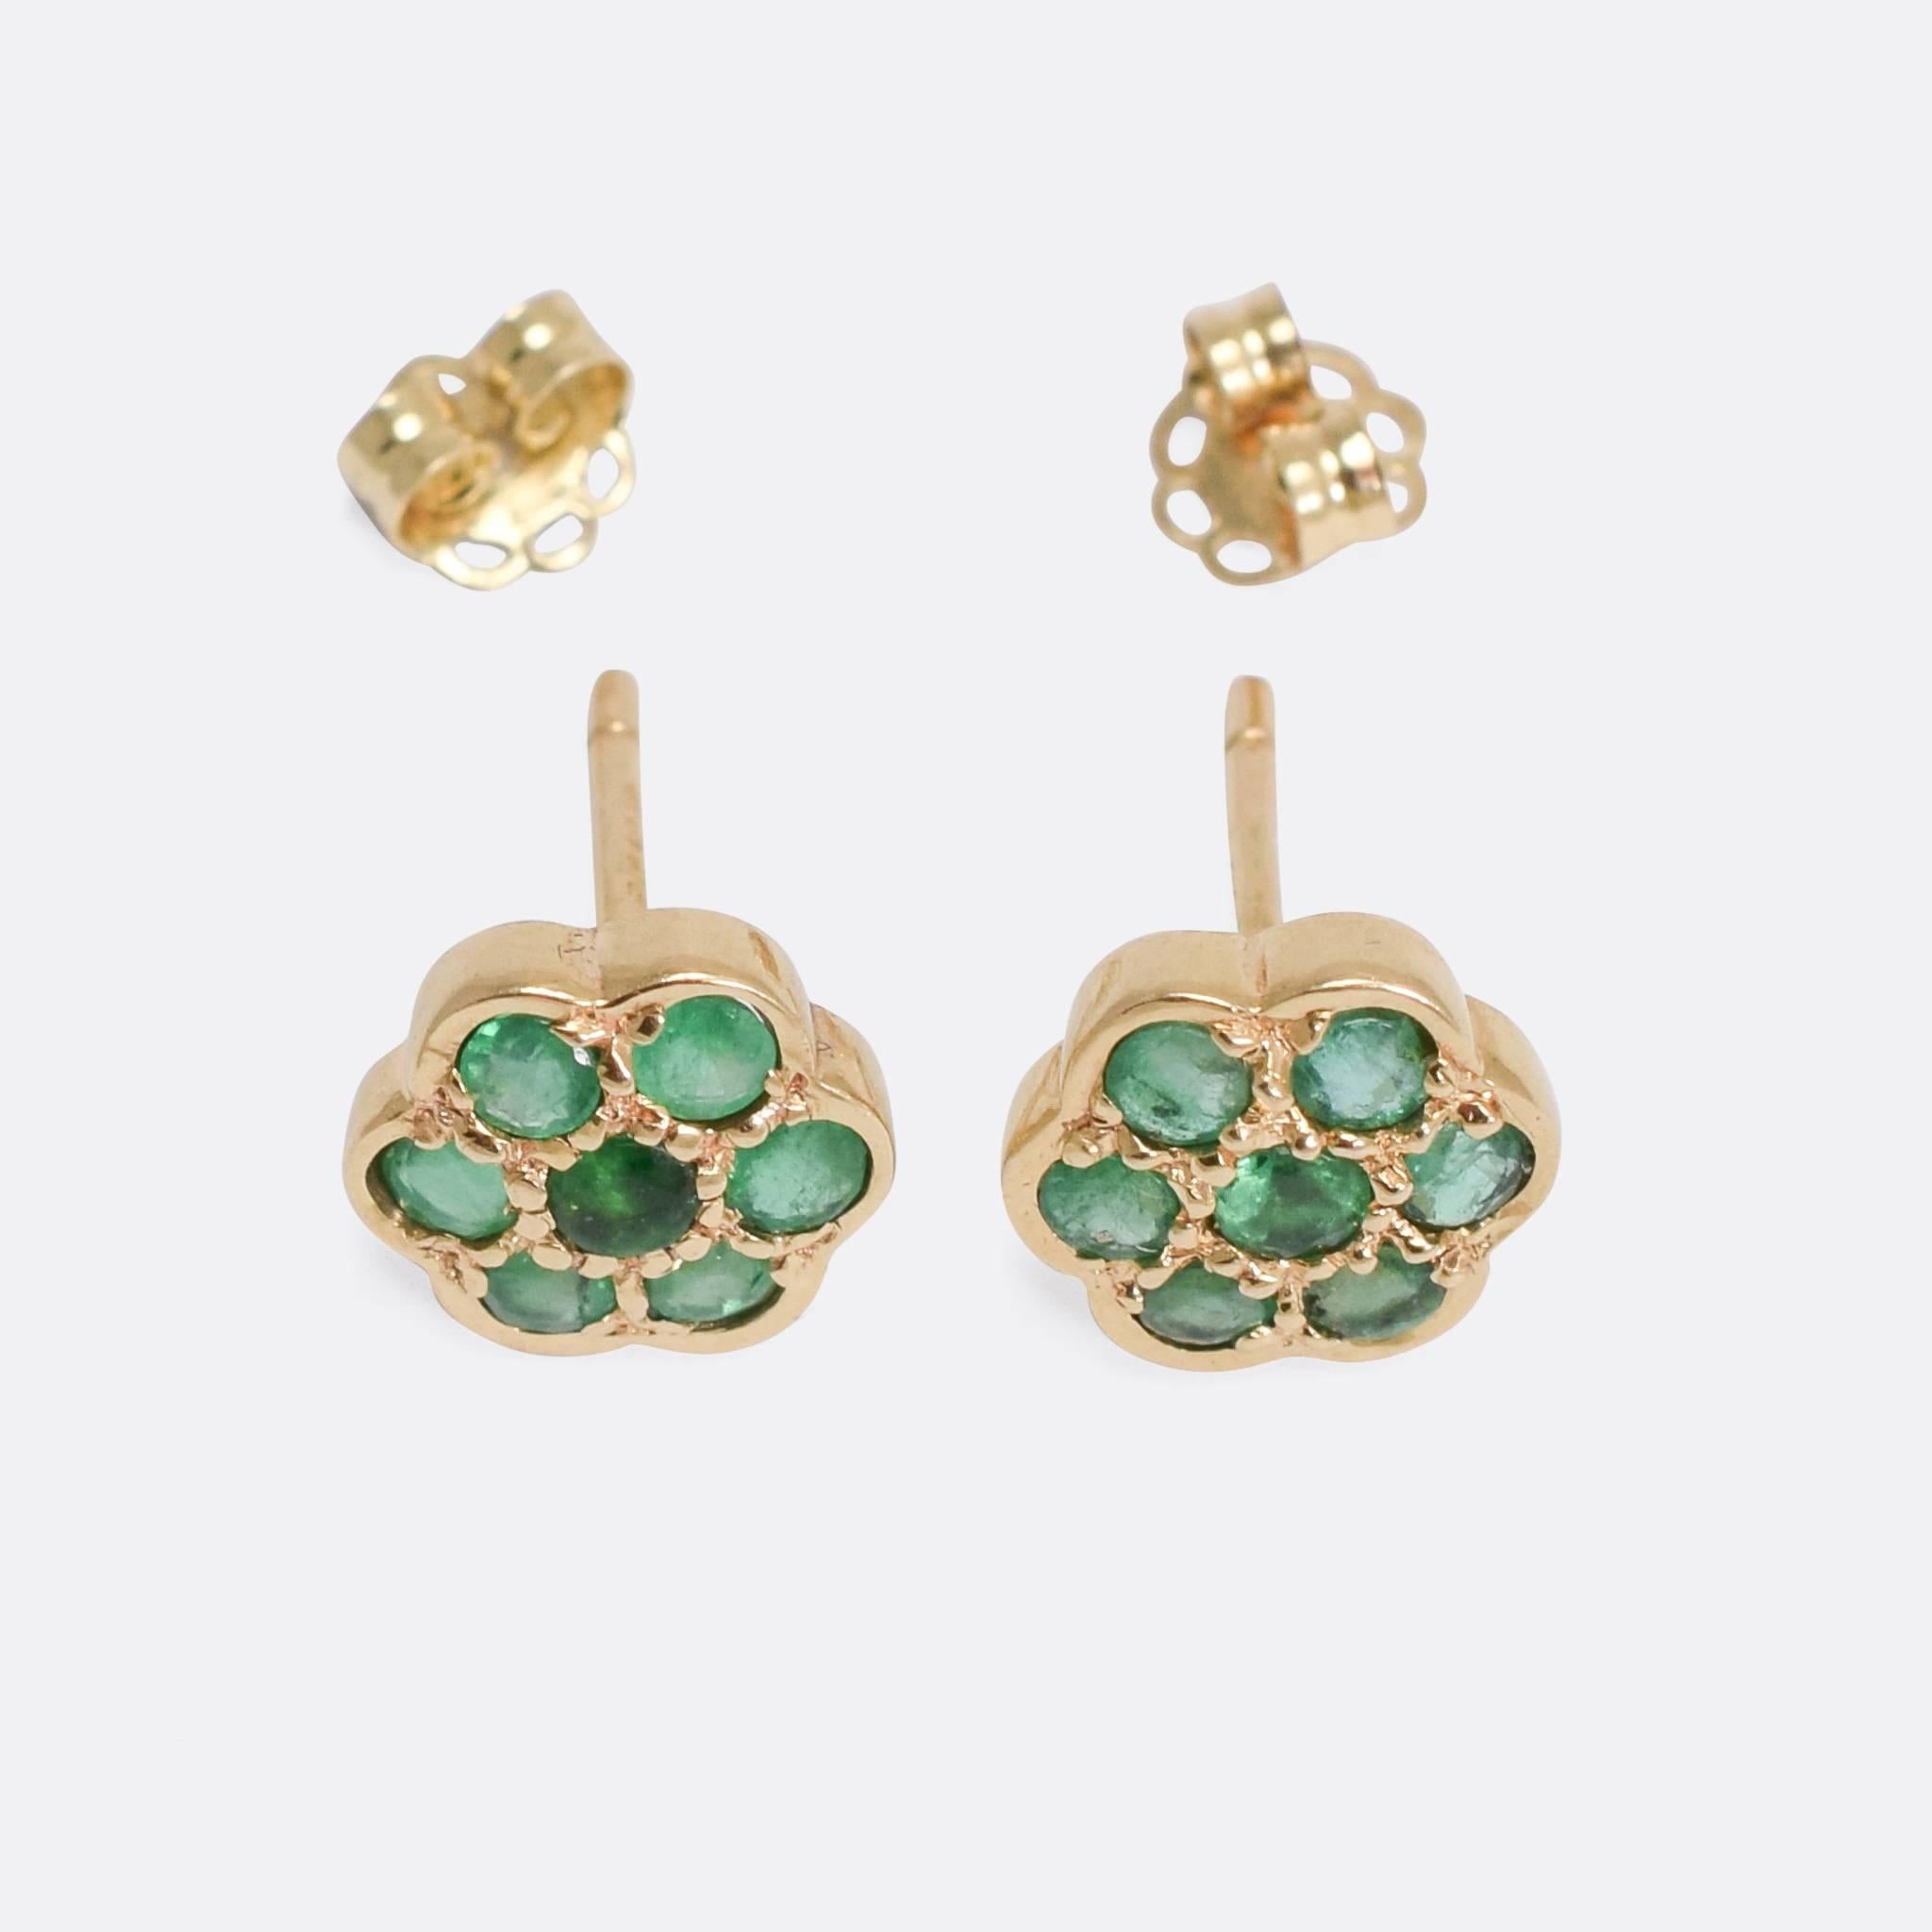 A sweet pair of flower cluster earrings, modelled in 9k gold and each one set with nine natural emeralds. They were made in the 1980s, a good size at just under 1cm in width.

STONES
Natural Emeralds - 2.5mm diameter

MEASUREMENTS
Width: